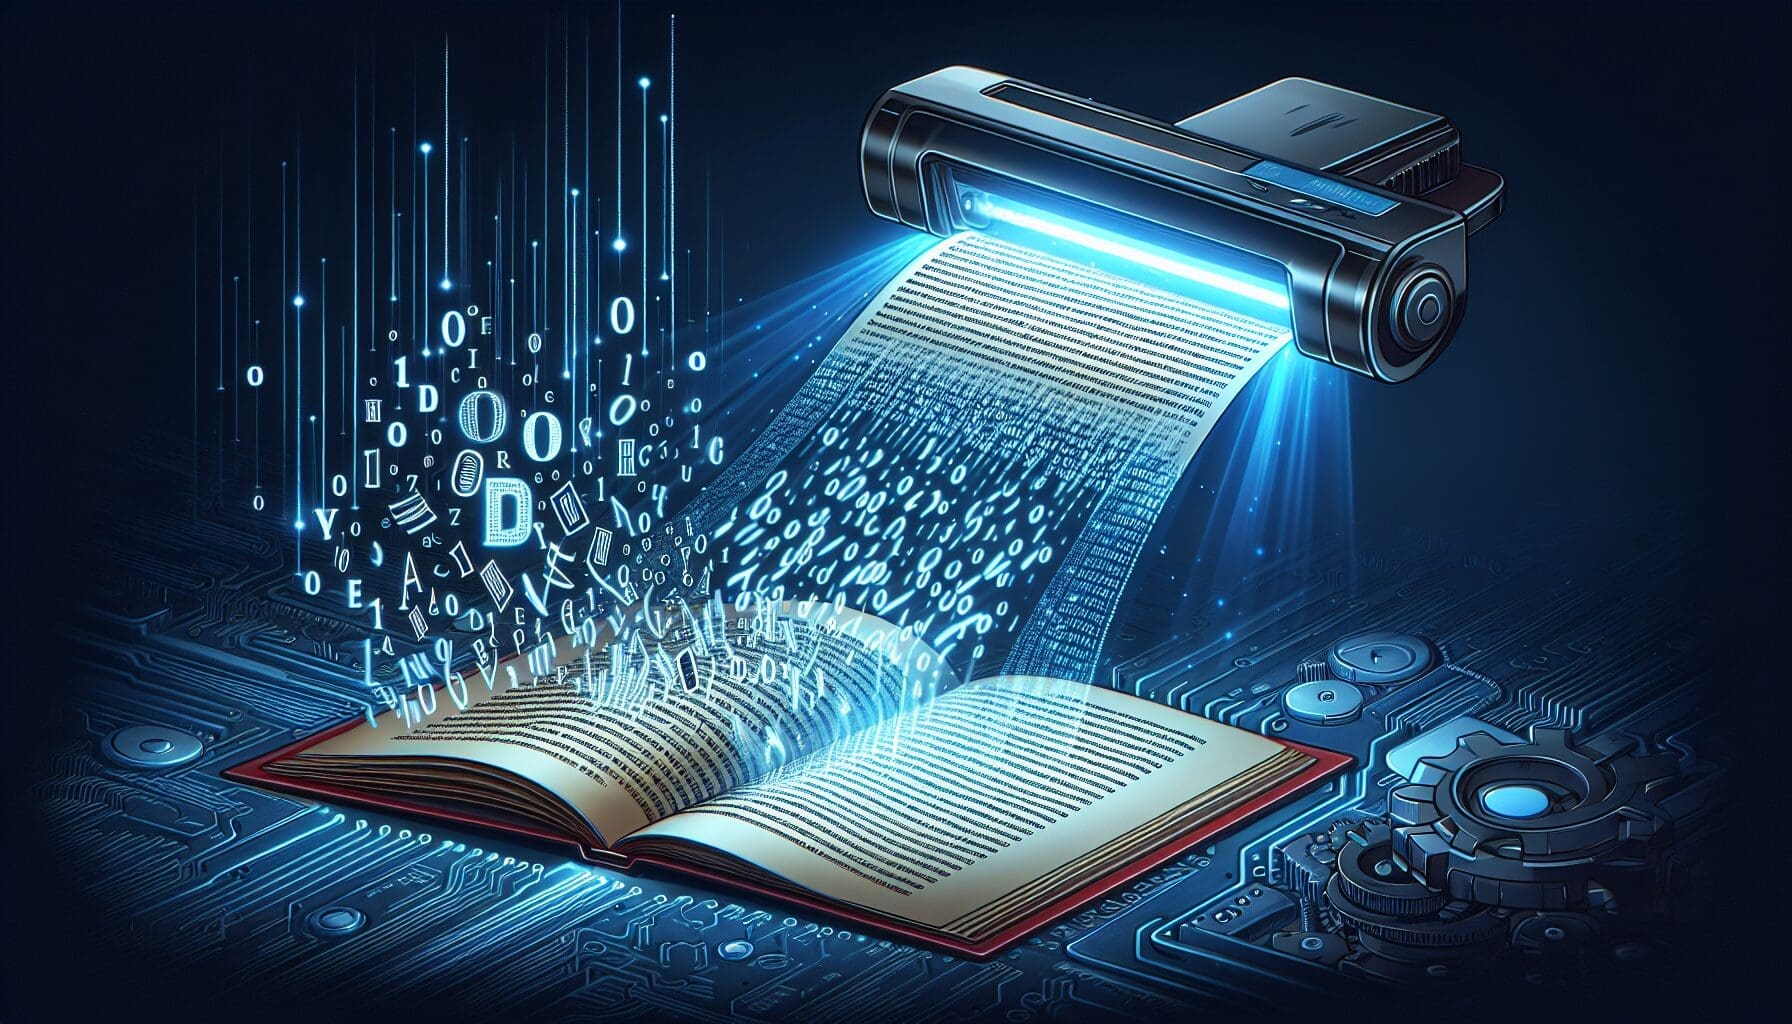 Illustration of OCR technology converting scanned text